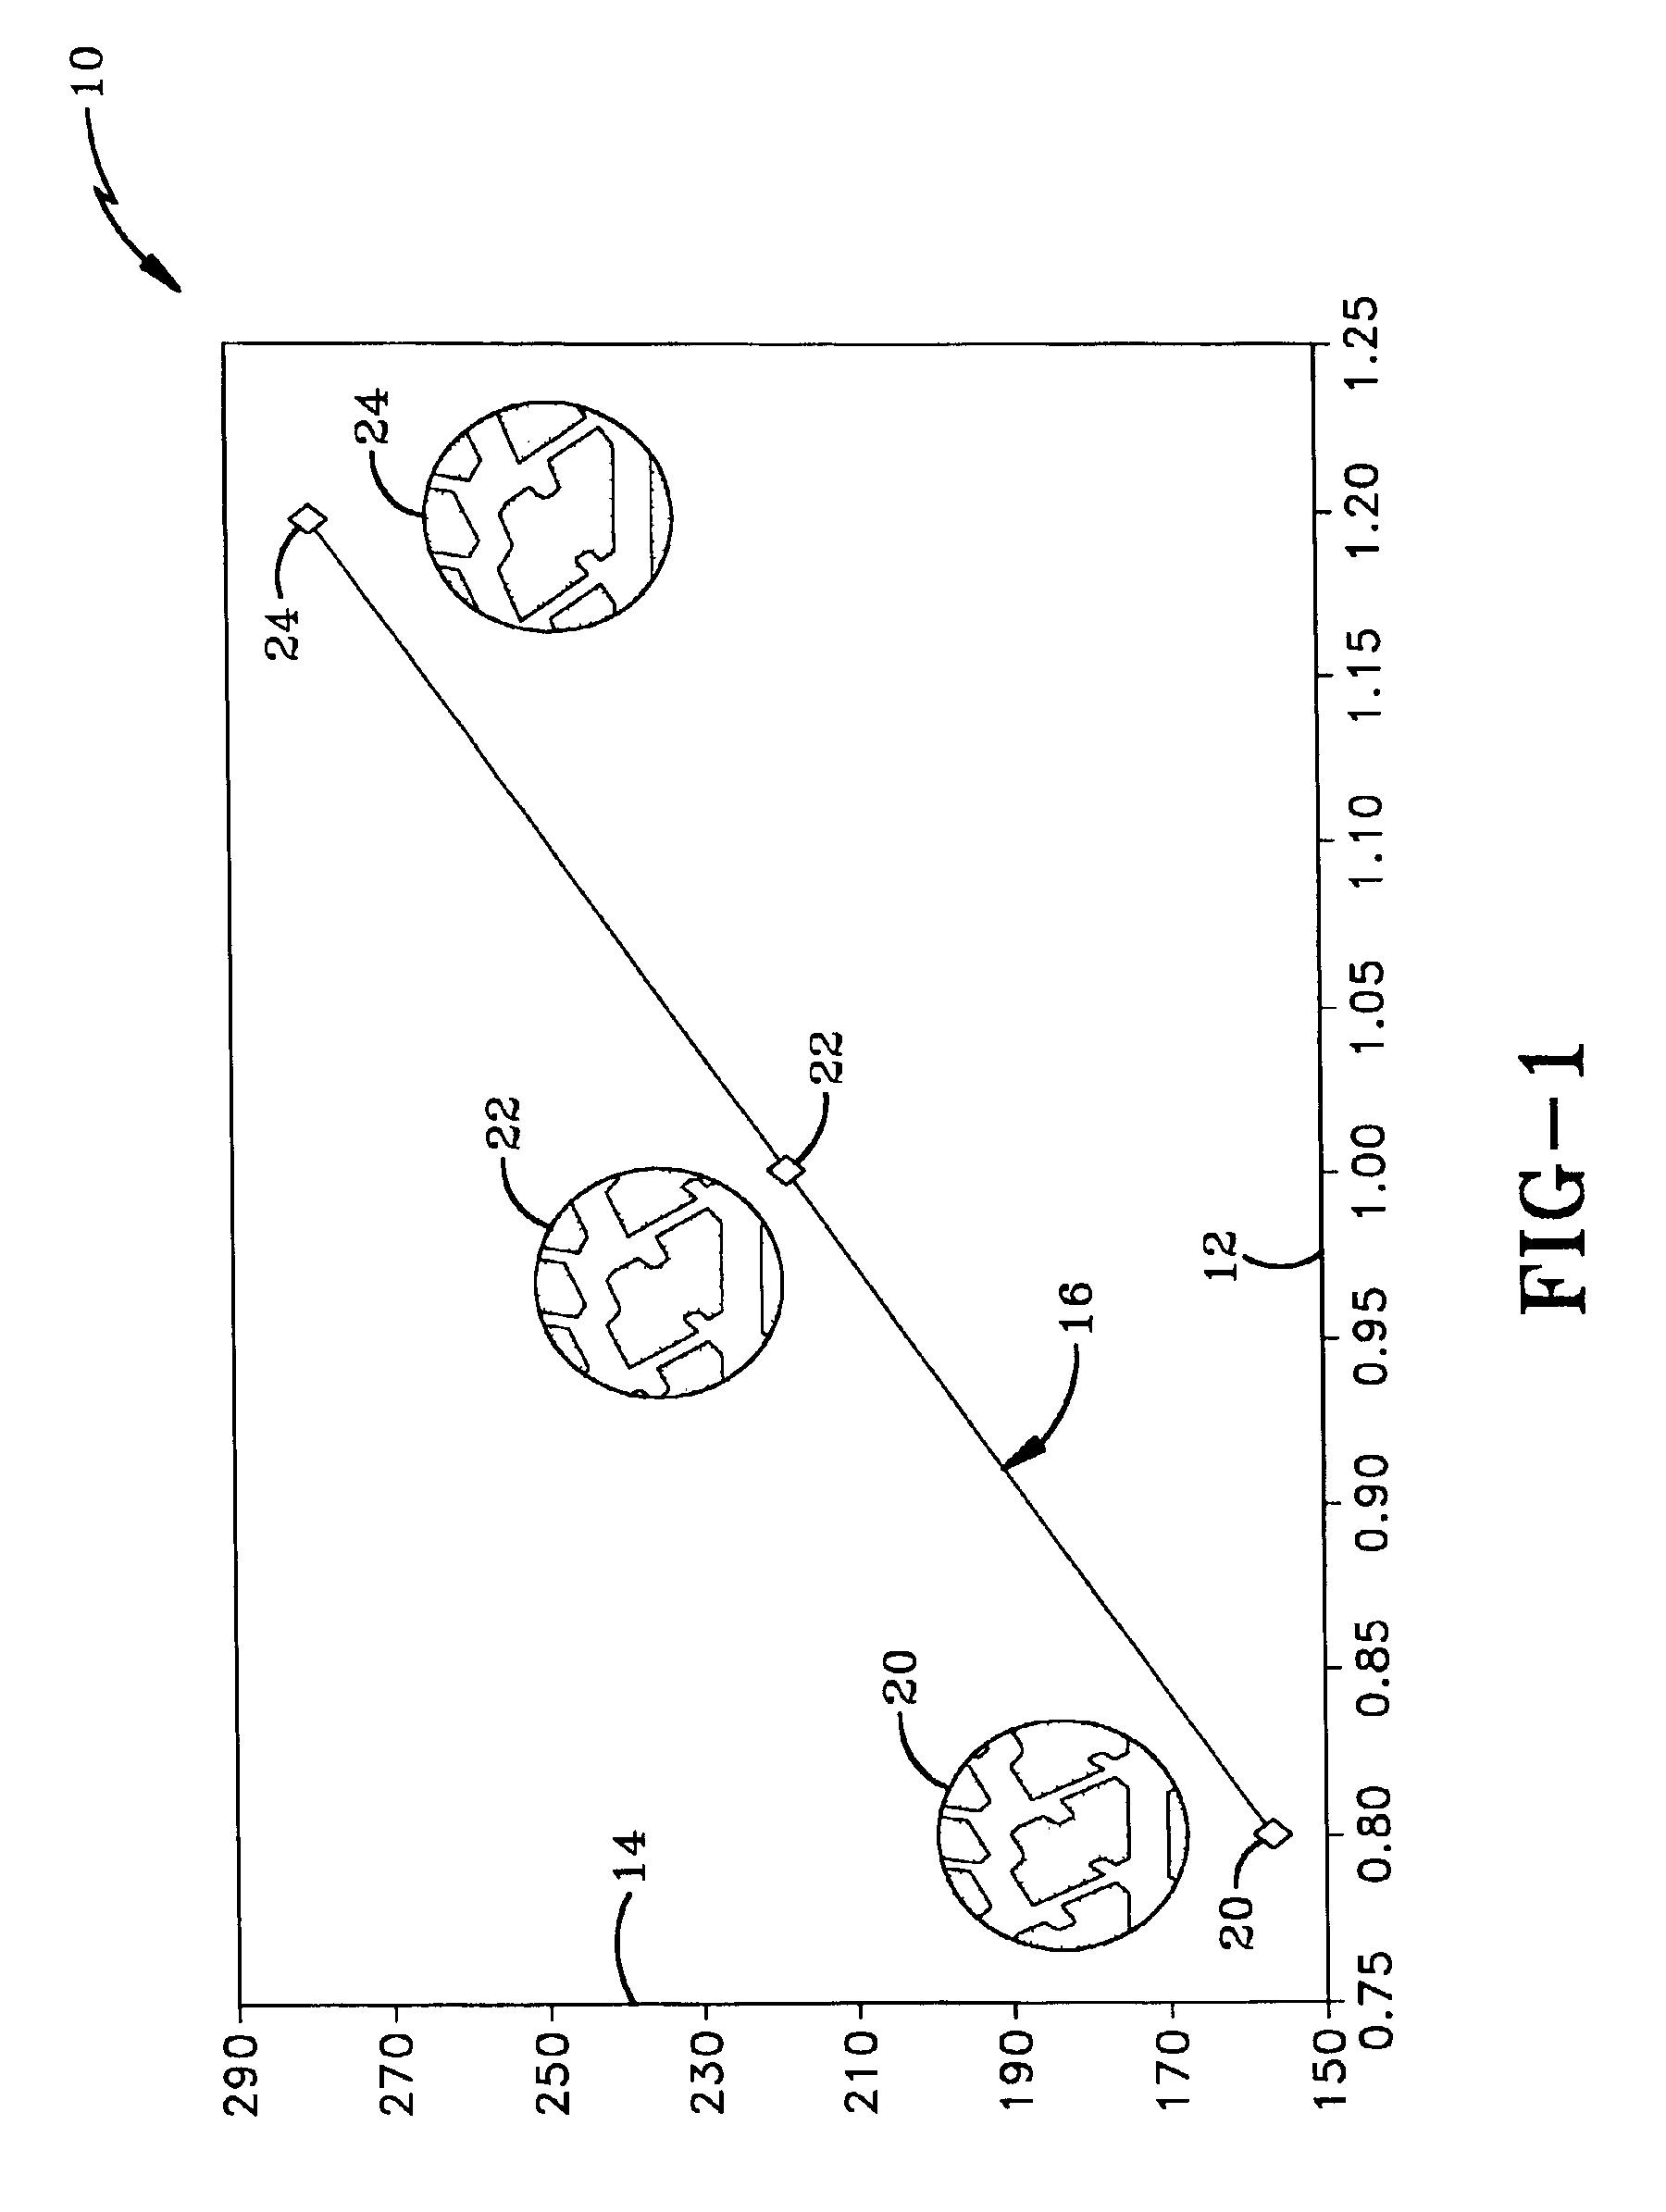 Method of analyzing tire pitch sequence based on lug stiffness variations